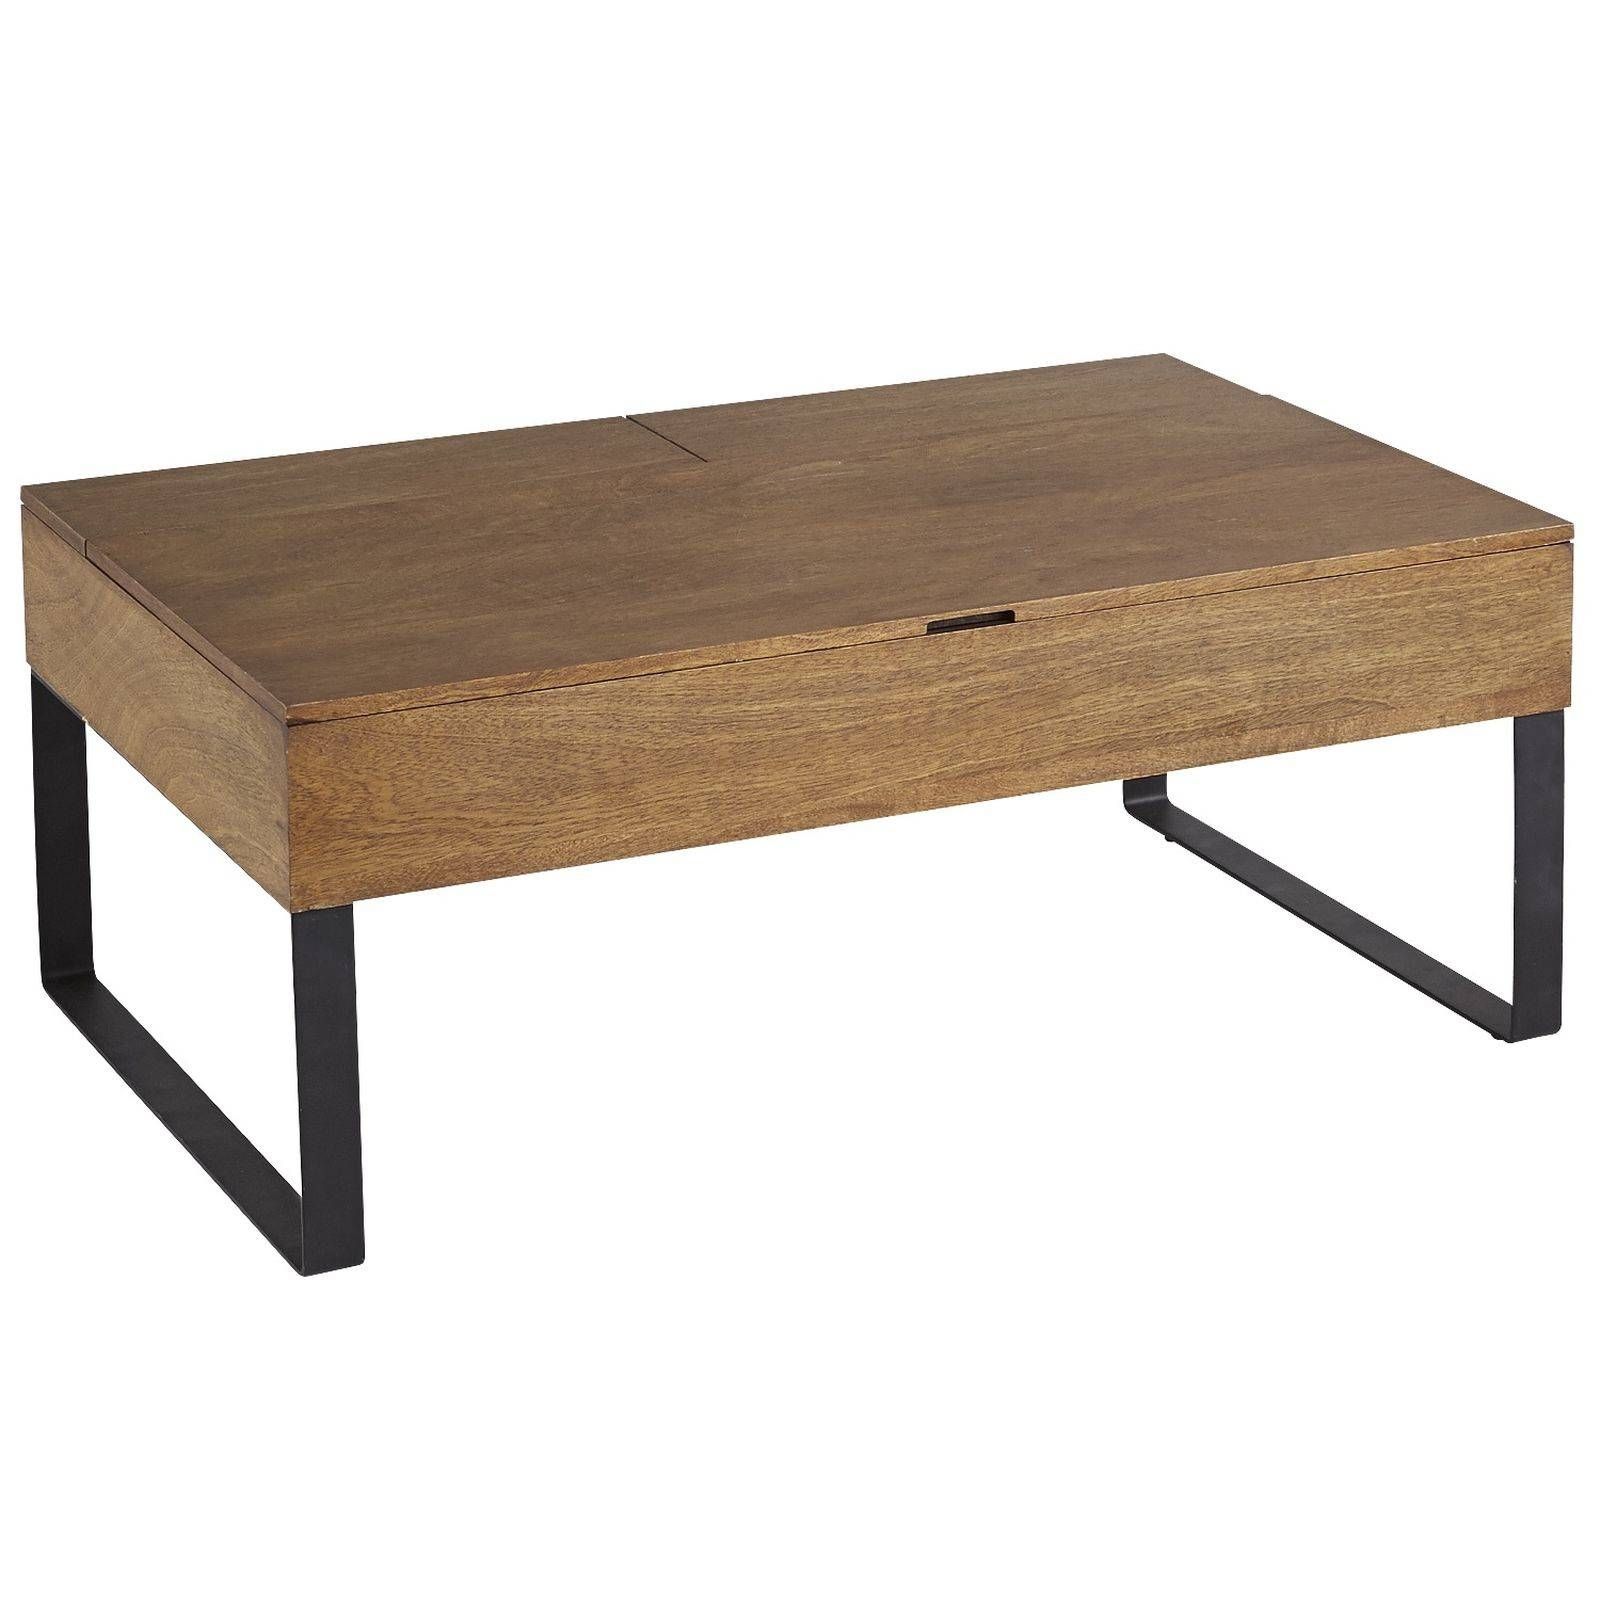 Vancouver Petite Solid Oak Lift Top Rectangular Coffee Table Within Glass Lift Top Coffee Tables (View 21 of 30)